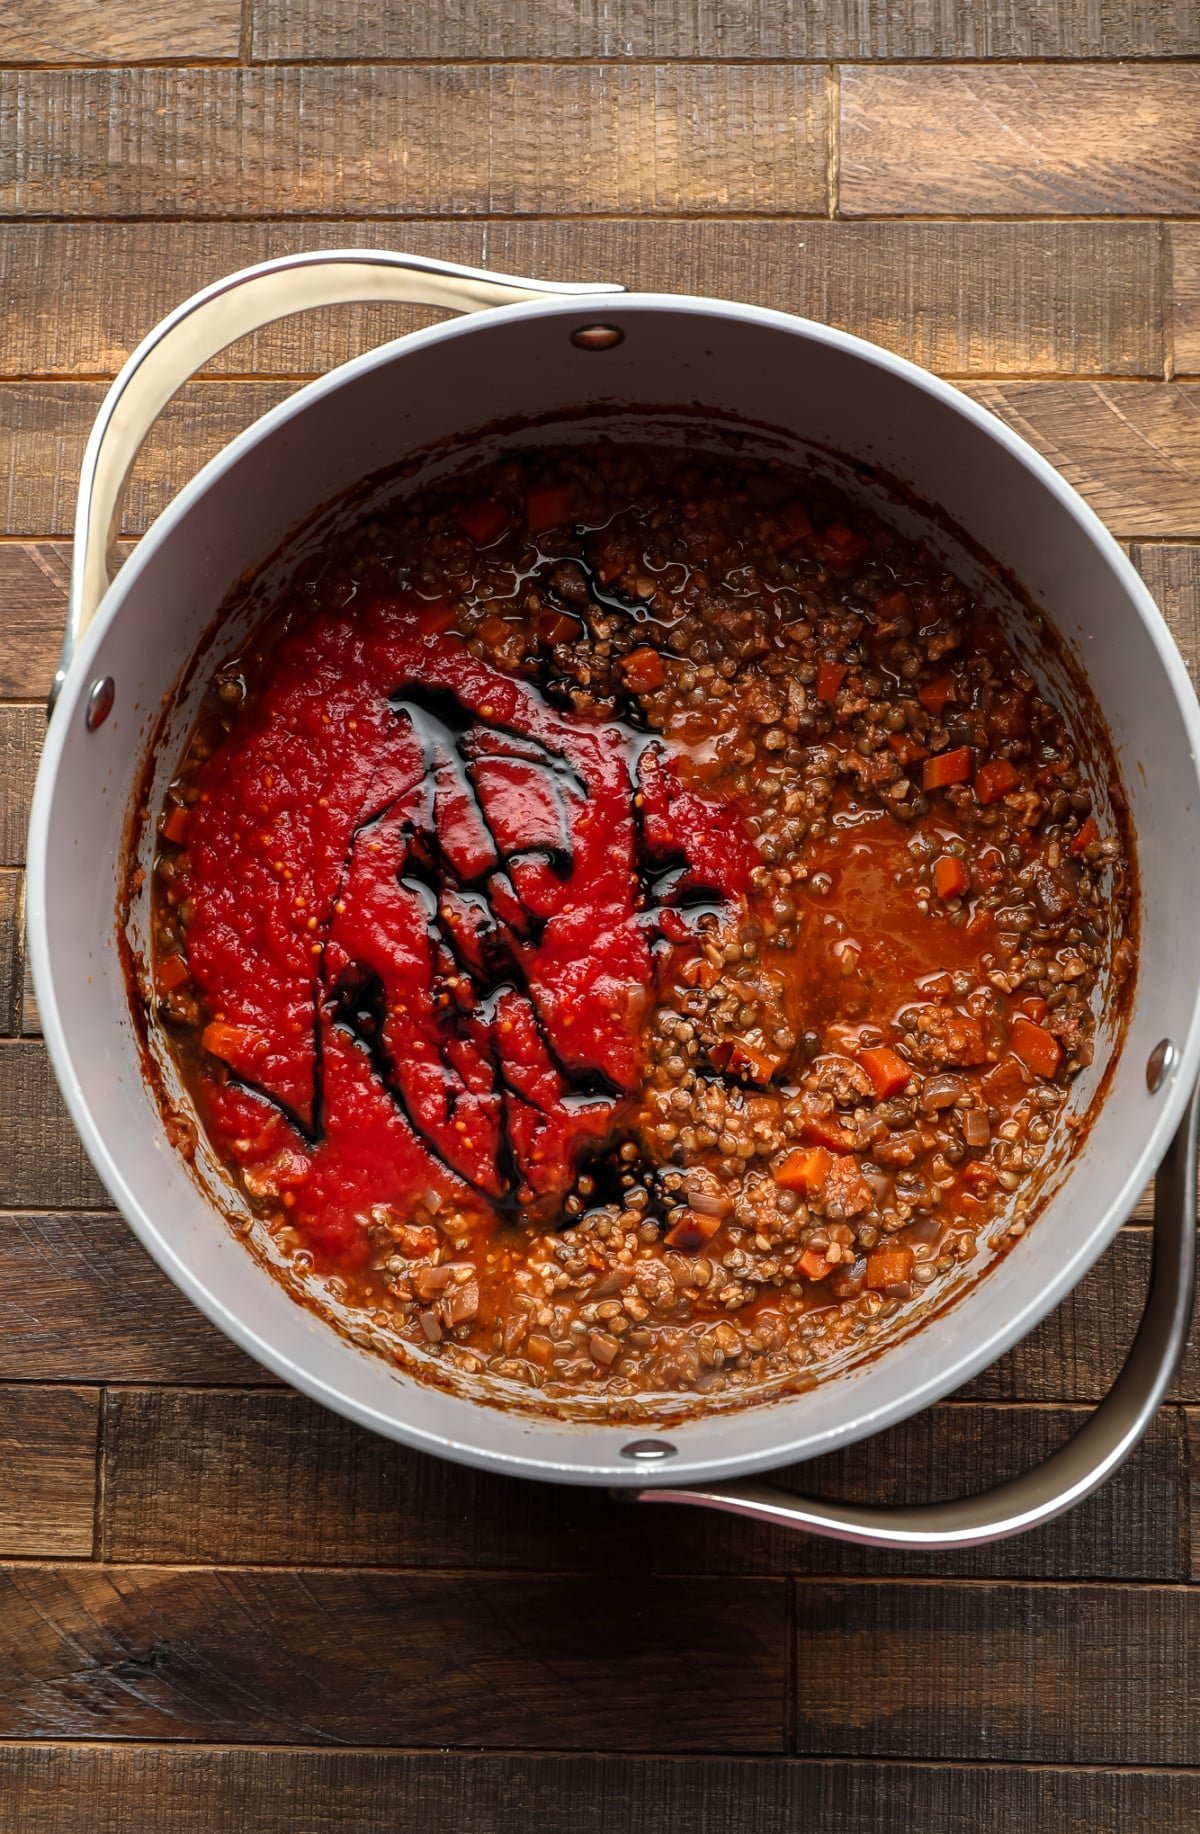 pot with lentils and red sauce in it, unstirred